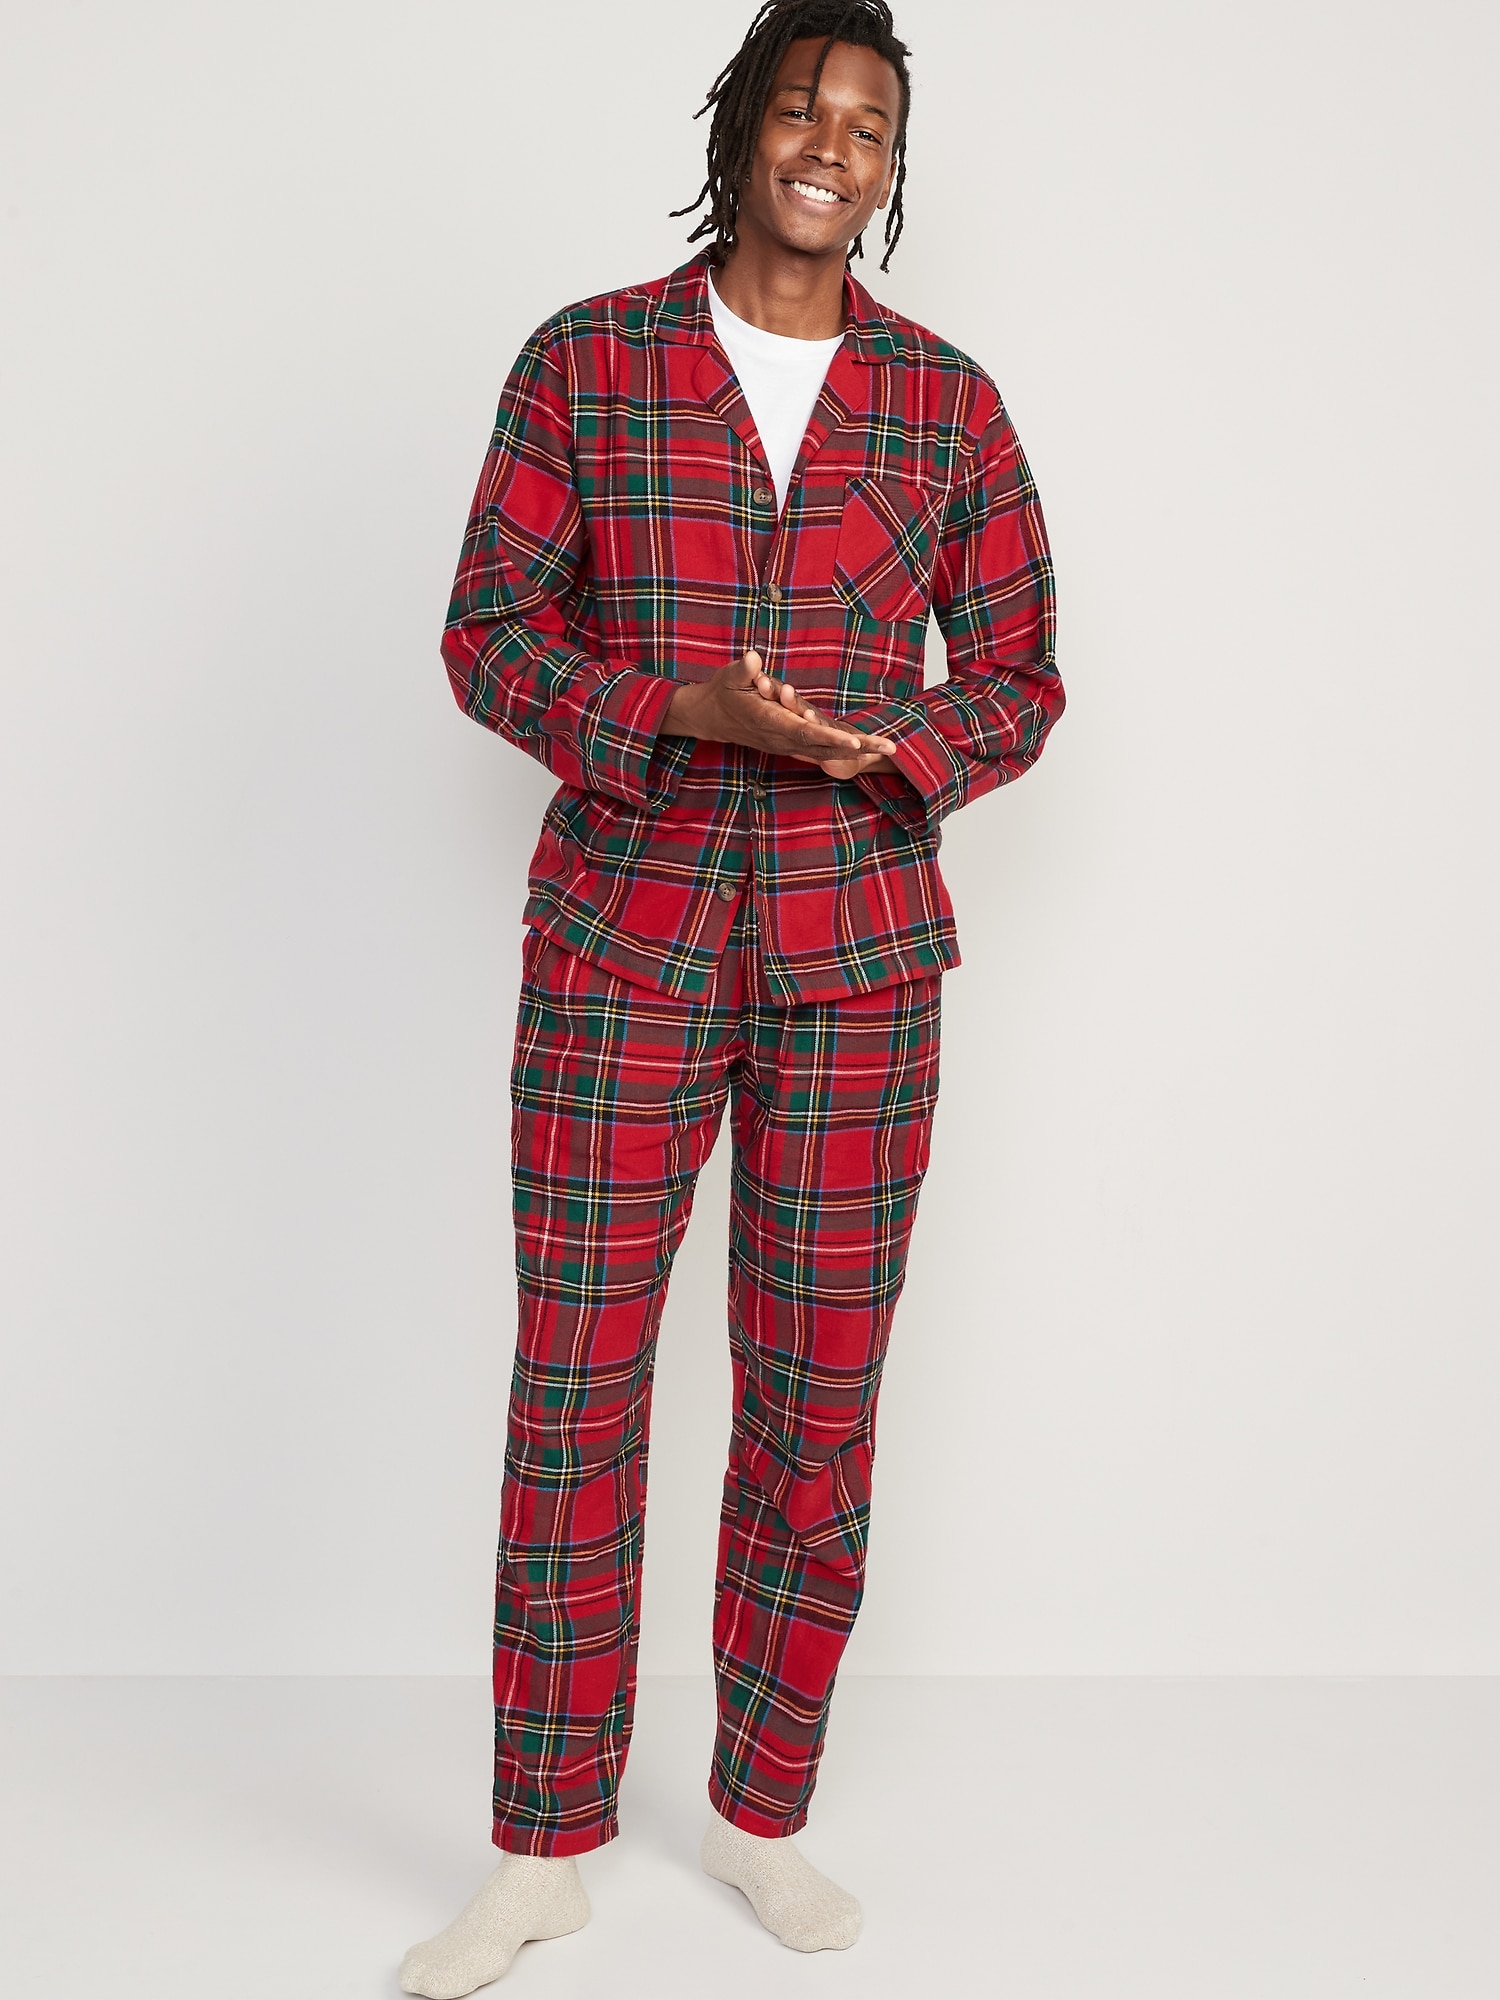 Old Navy Matching Plaid Flannel Pajama Set for Men red. 1